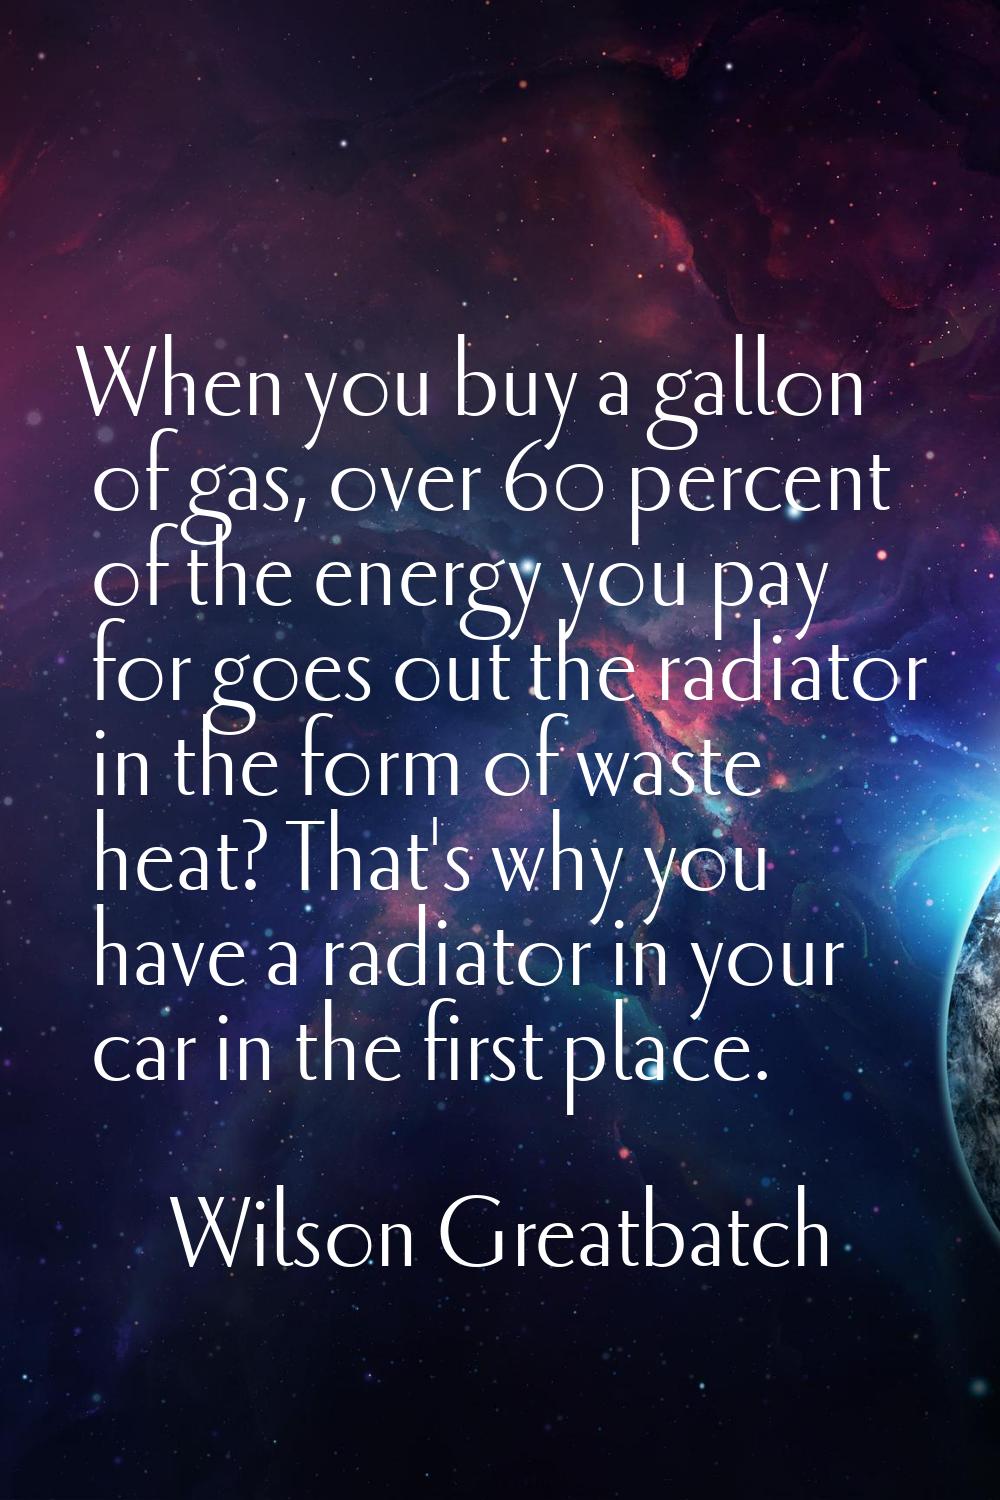 When you buy a gallon of gas, over 60 percent of the energy you pay for goes out the radiator in th